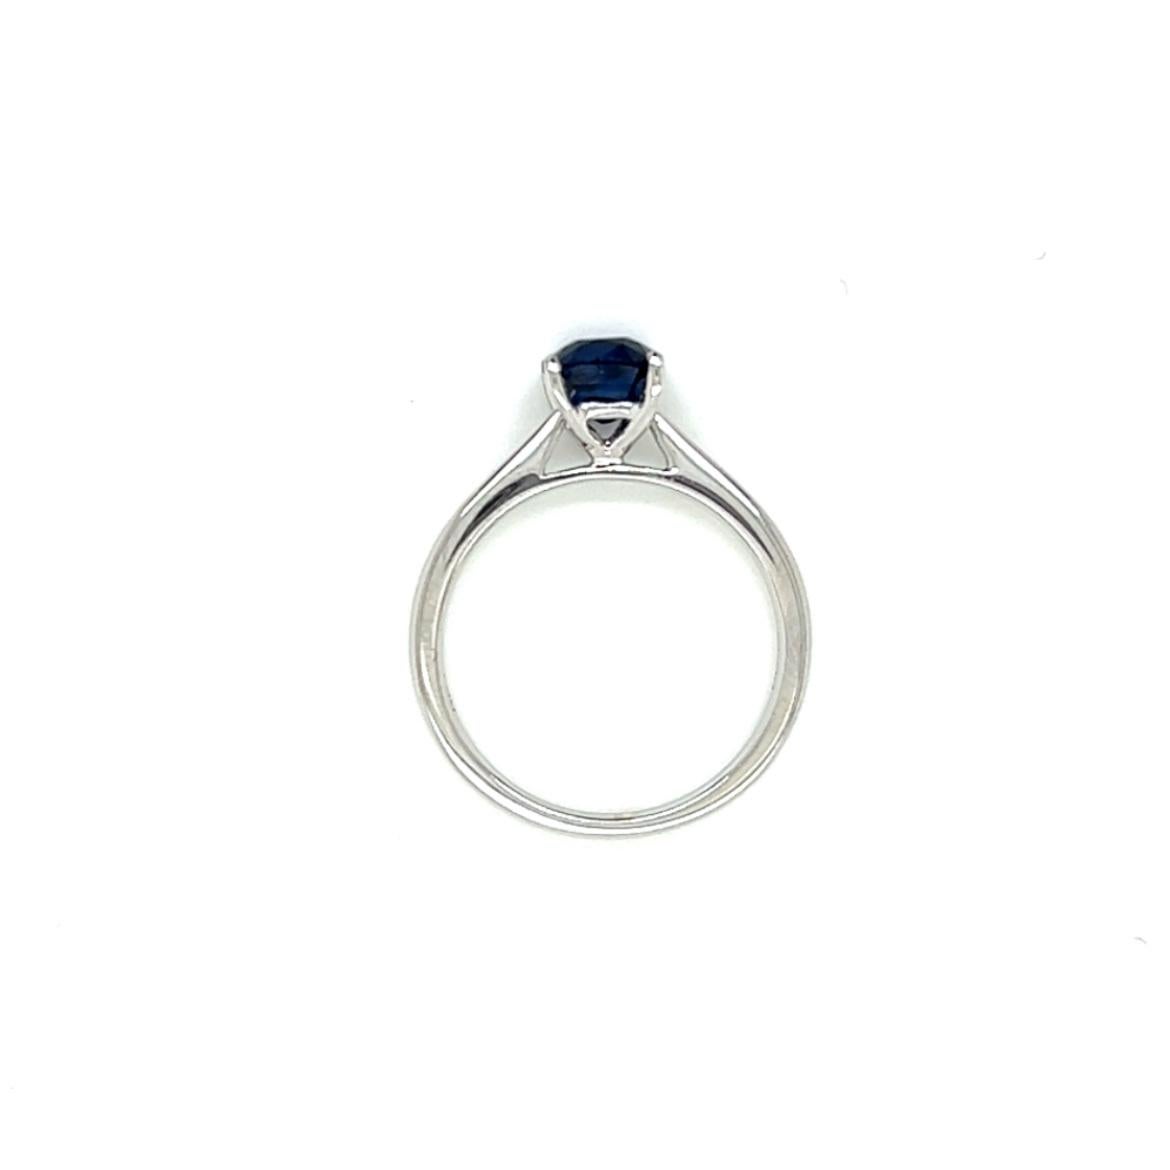 1.28 Carat Cushion cut Blue Sapphire Solitaire Ring in 18K White Gold For Sale 1